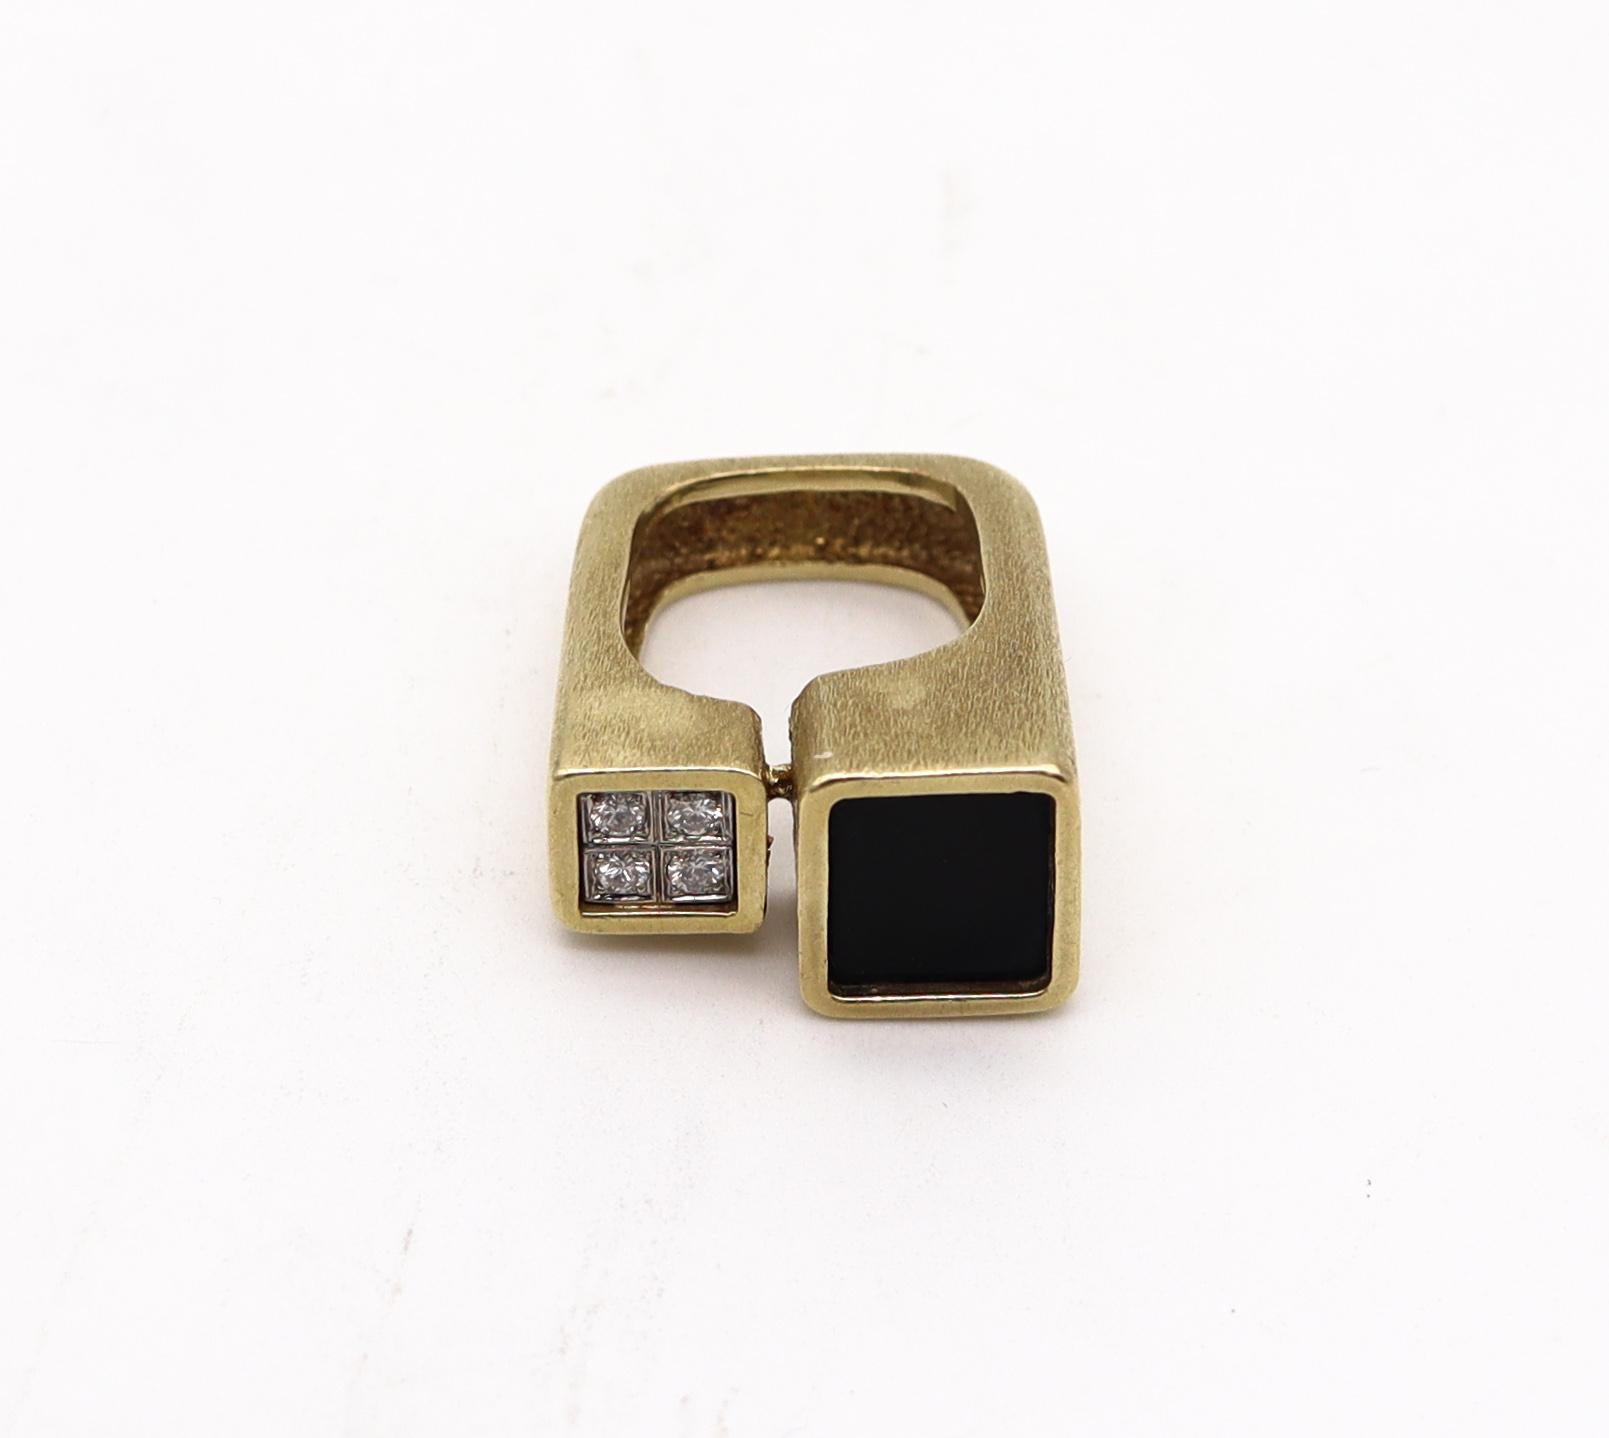 Modernist La Triomphe Geometric Cocktail Ring in 14kt Gold with Diamonds and Black Onyx